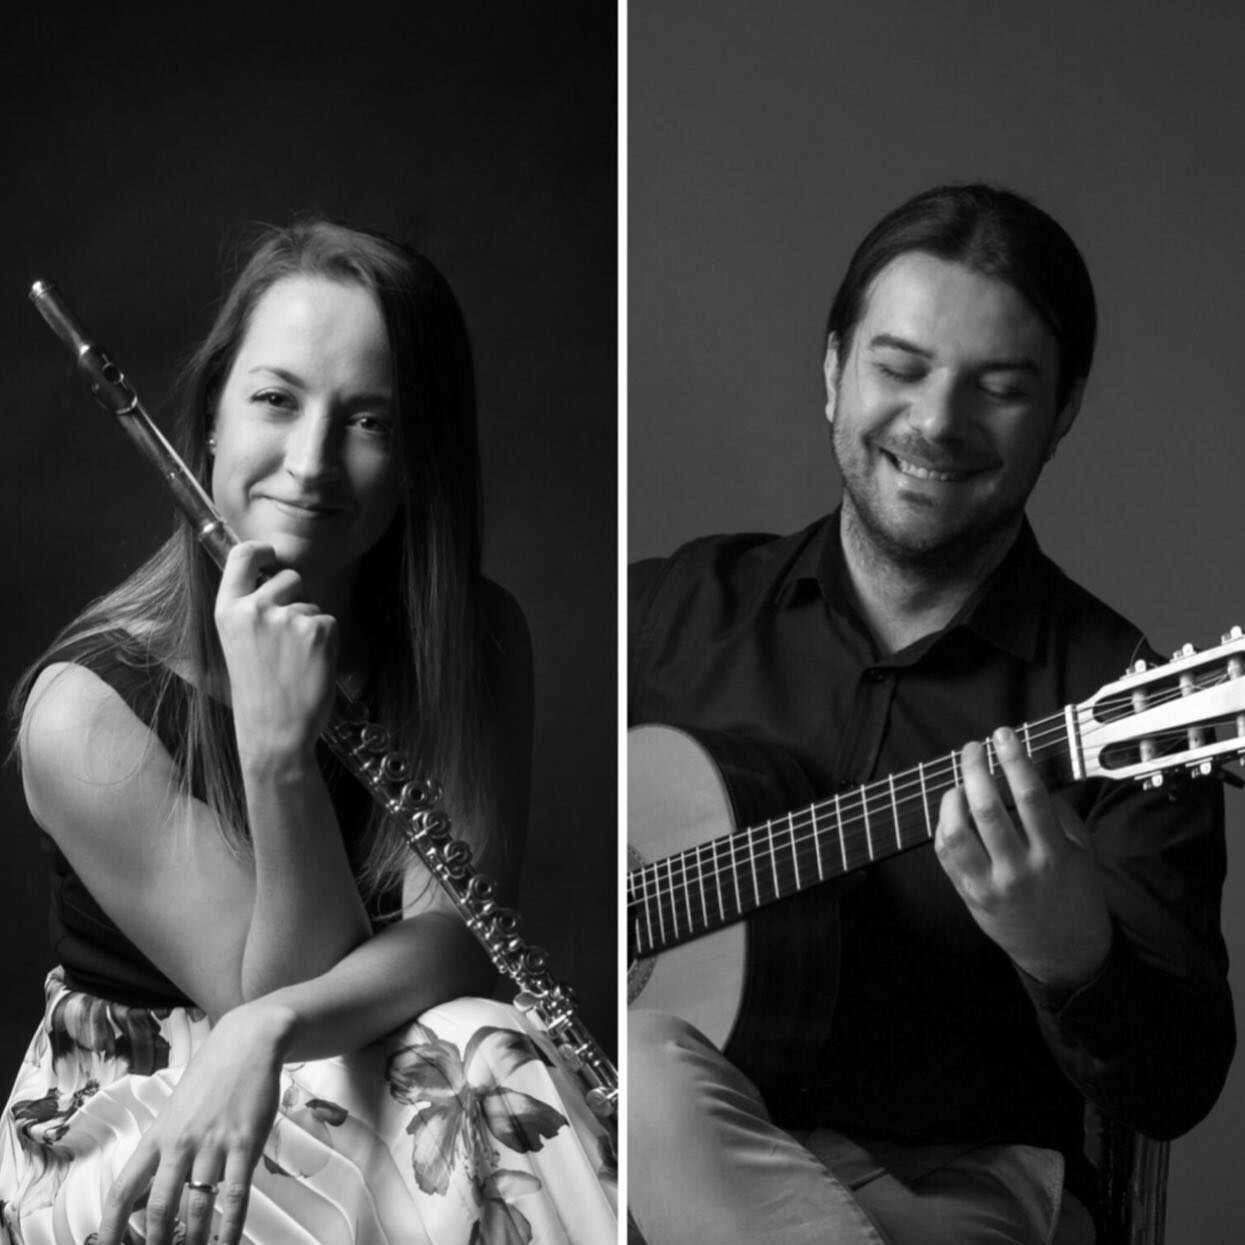 ✨I&rsquo;m very happy to participate in the 2023 edition of the festival @las_noches_zh with my dear colleague @panos_guitart We&rsquo;ll be playing wonderful music for flute and guitar! 

✨Next concert: 
Las Noches Festival - Latinamerican chamber m